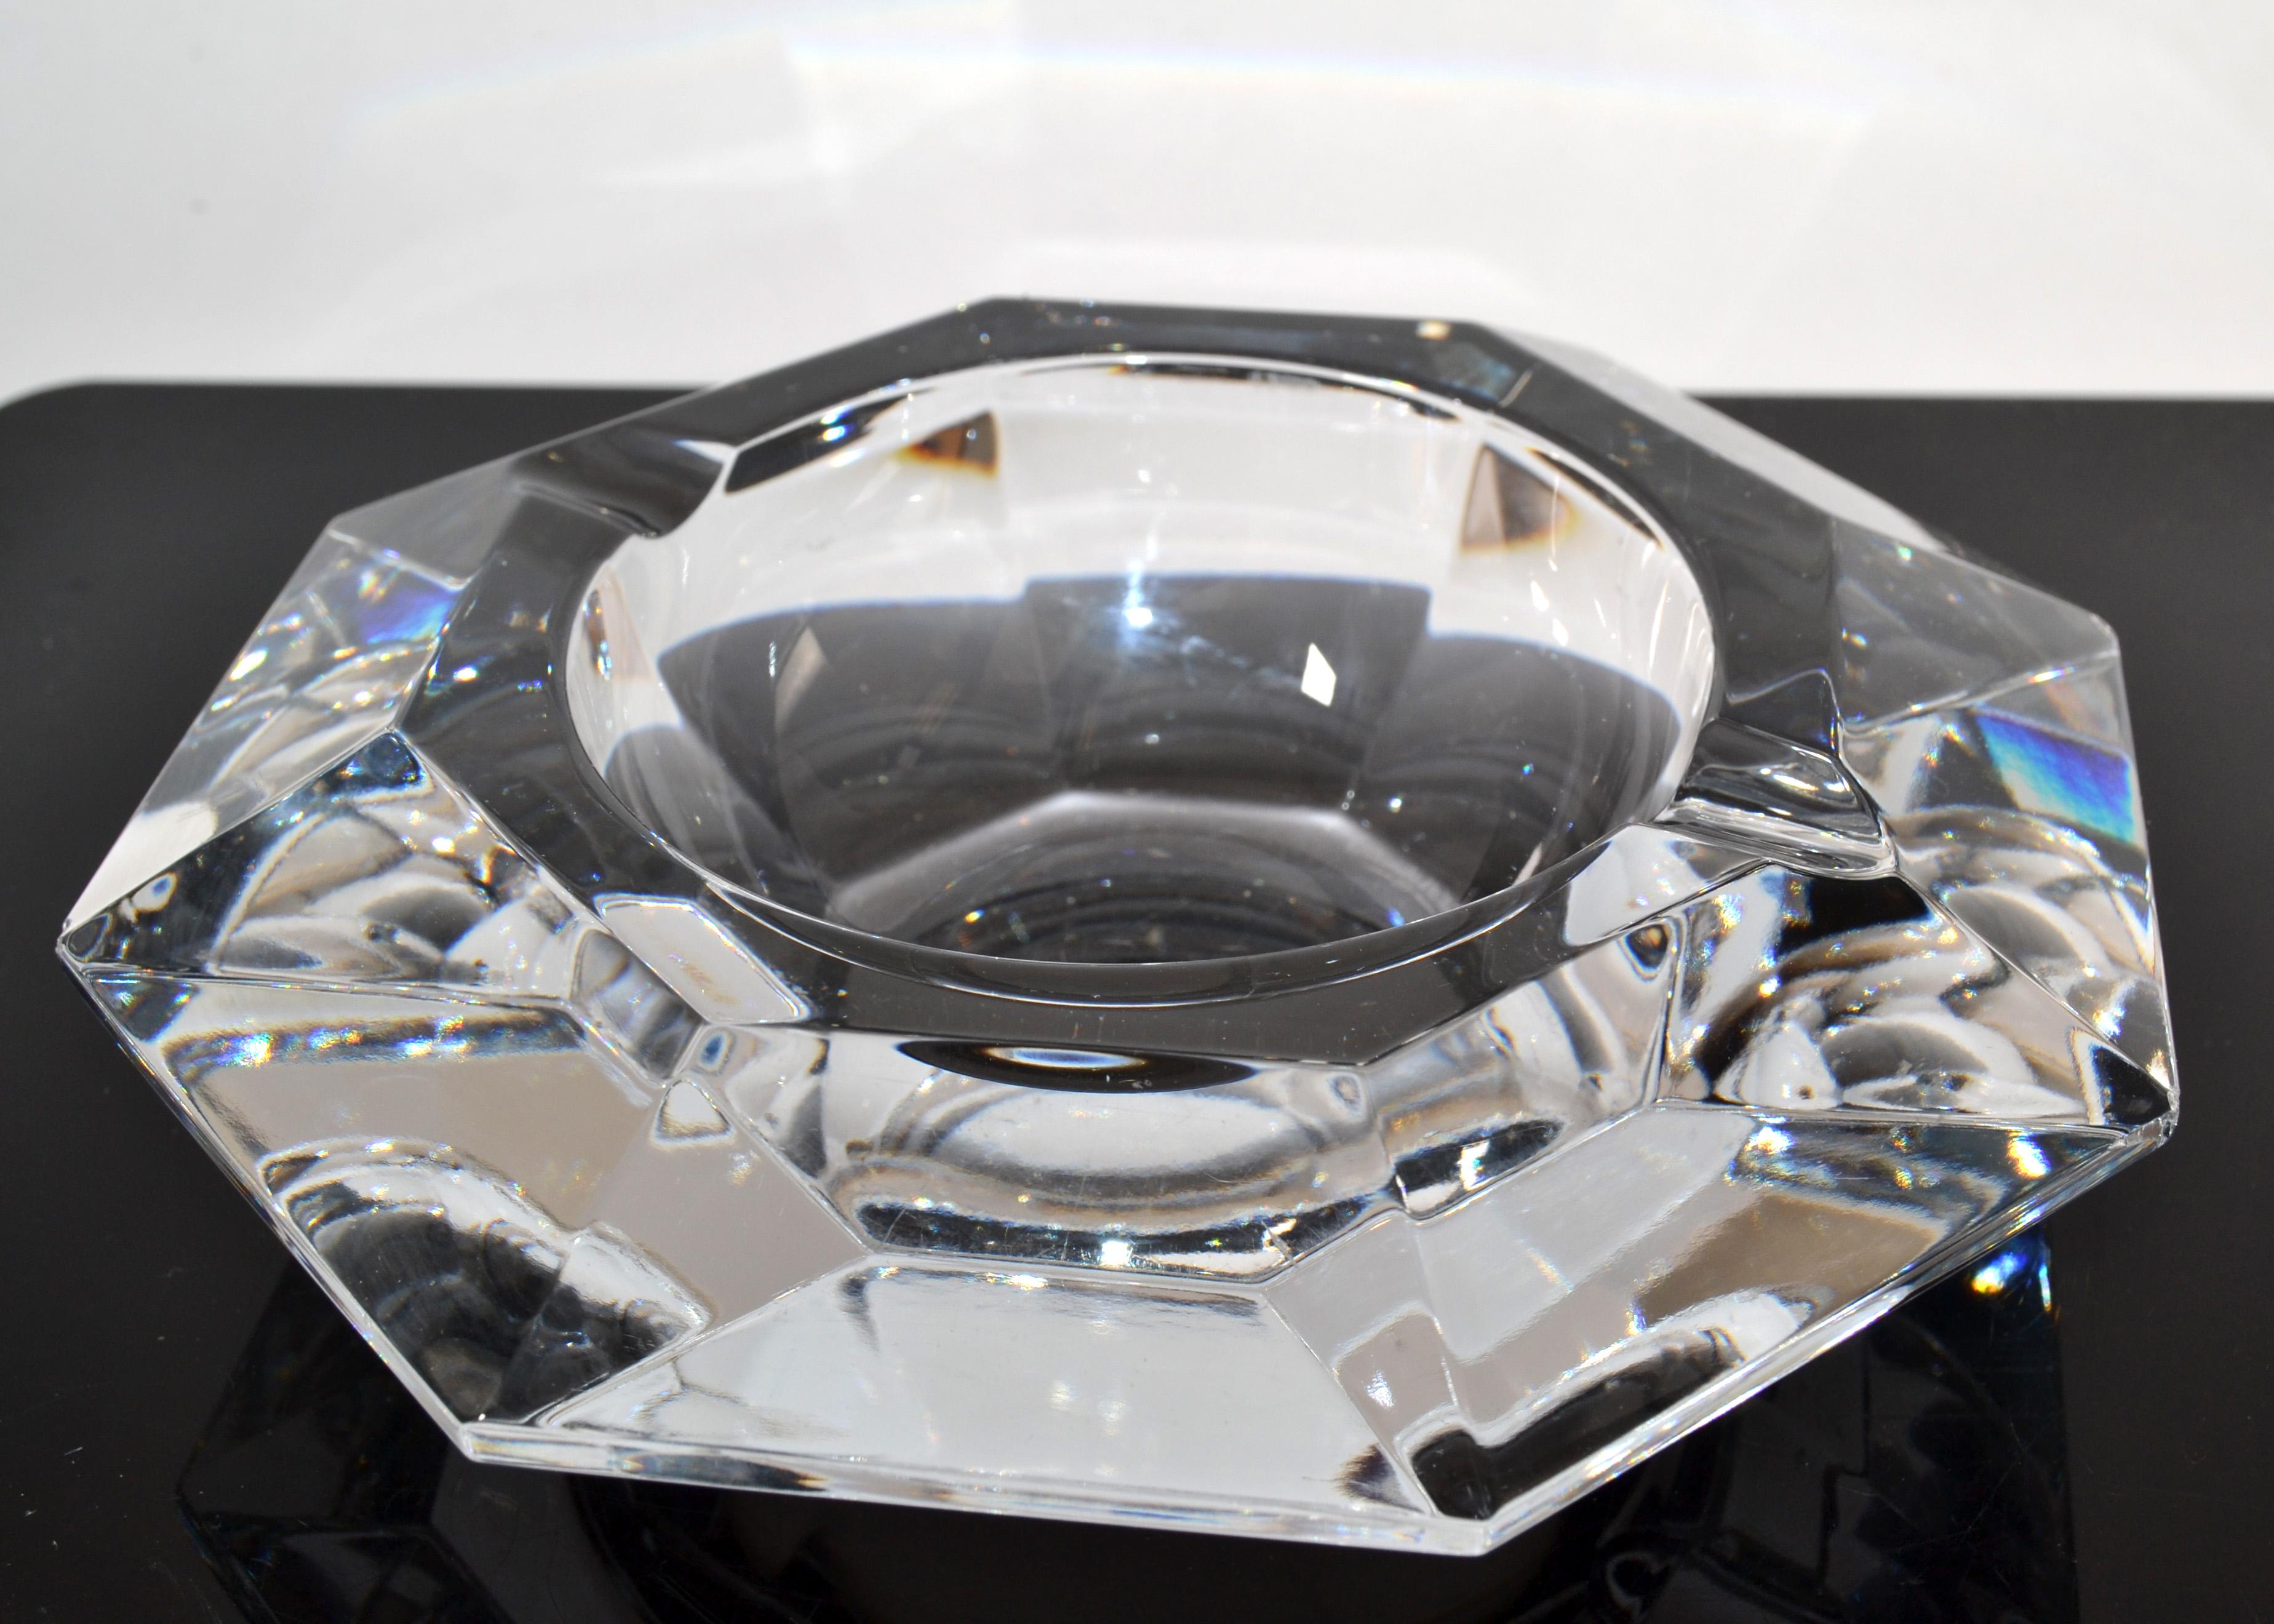 Signed Val Saint Lambert Diamond faceted shaped lead crystal Ashtray, handcut-to-clear, the glass clear thick, deeply and evenly cut, made in Belgium.
Engraved signature Val St. Lambert.
The faceted Ashtray is very heavy.
Very stylish Gift Idea for